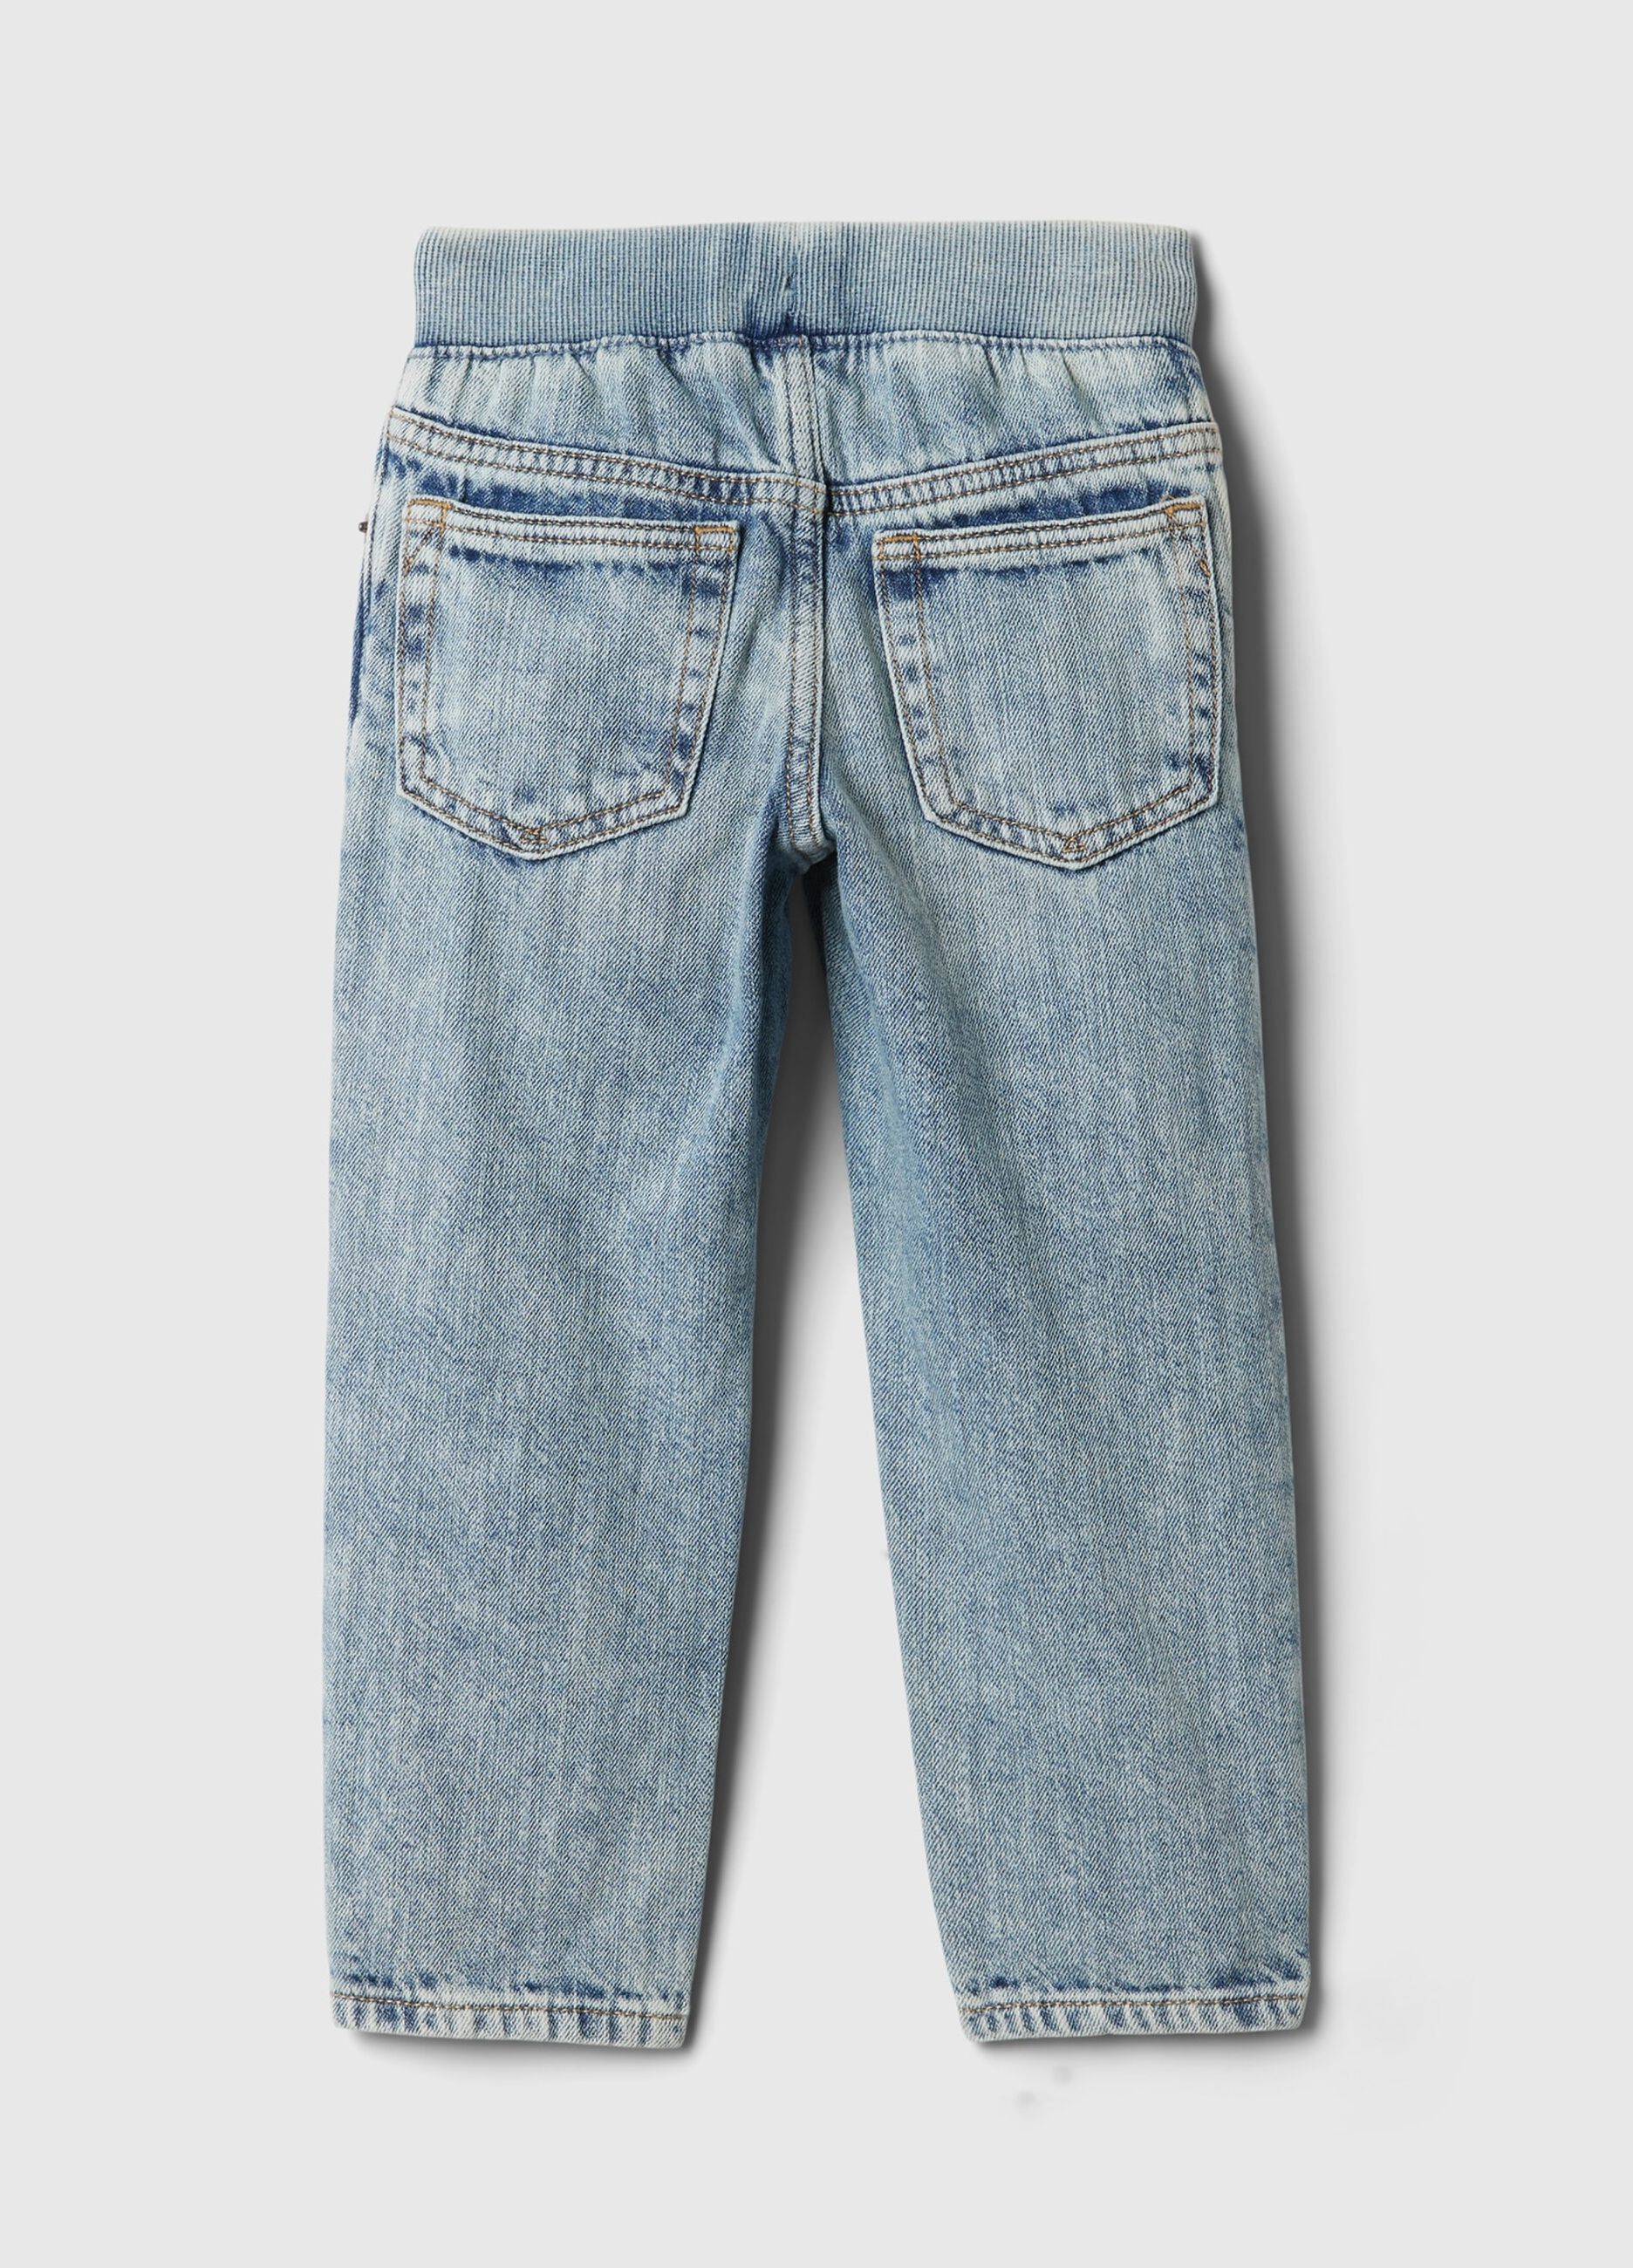 Denim joggers with drawstring and abrasions